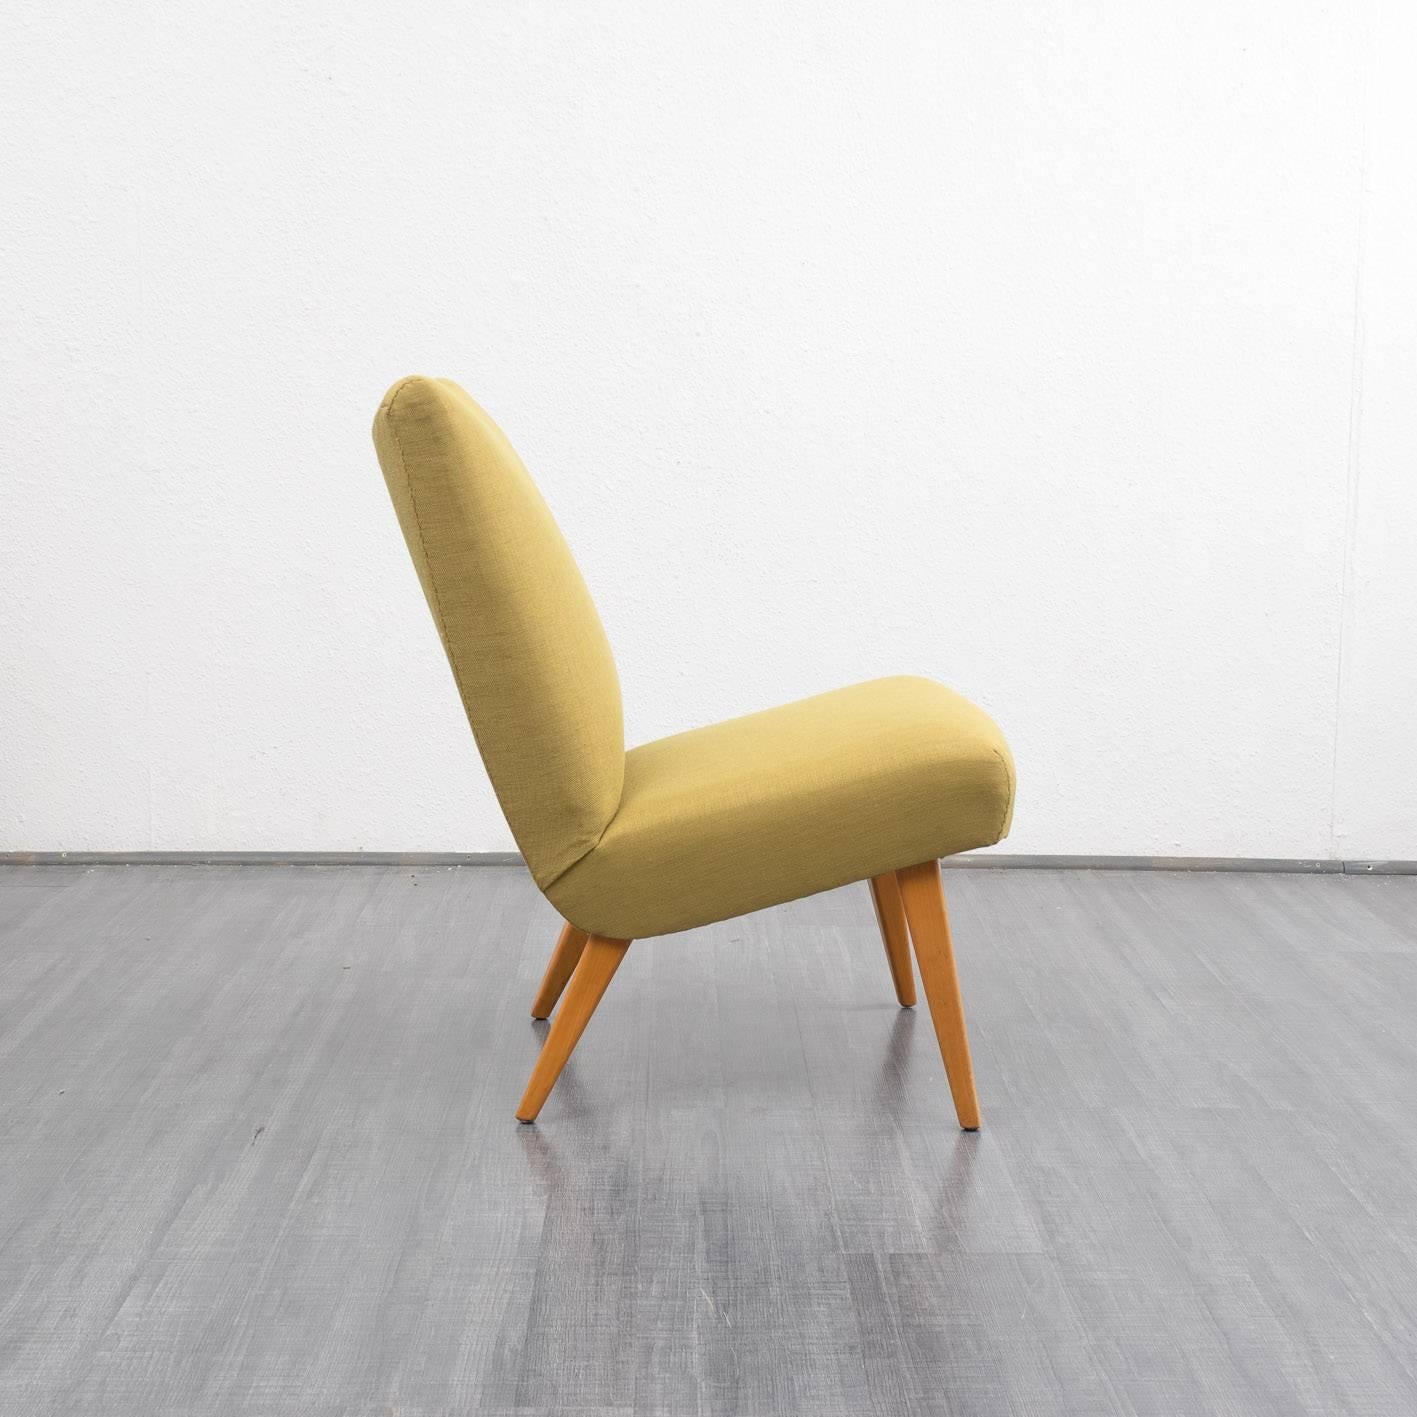 Shapely armchair from the 1950s.

Straight-lined design with slanted solid beech legs, typical of the time. The original barrel-arbor cushion has been reupholstered with new foam and newly covered with a high-quality green-yellow upholstery